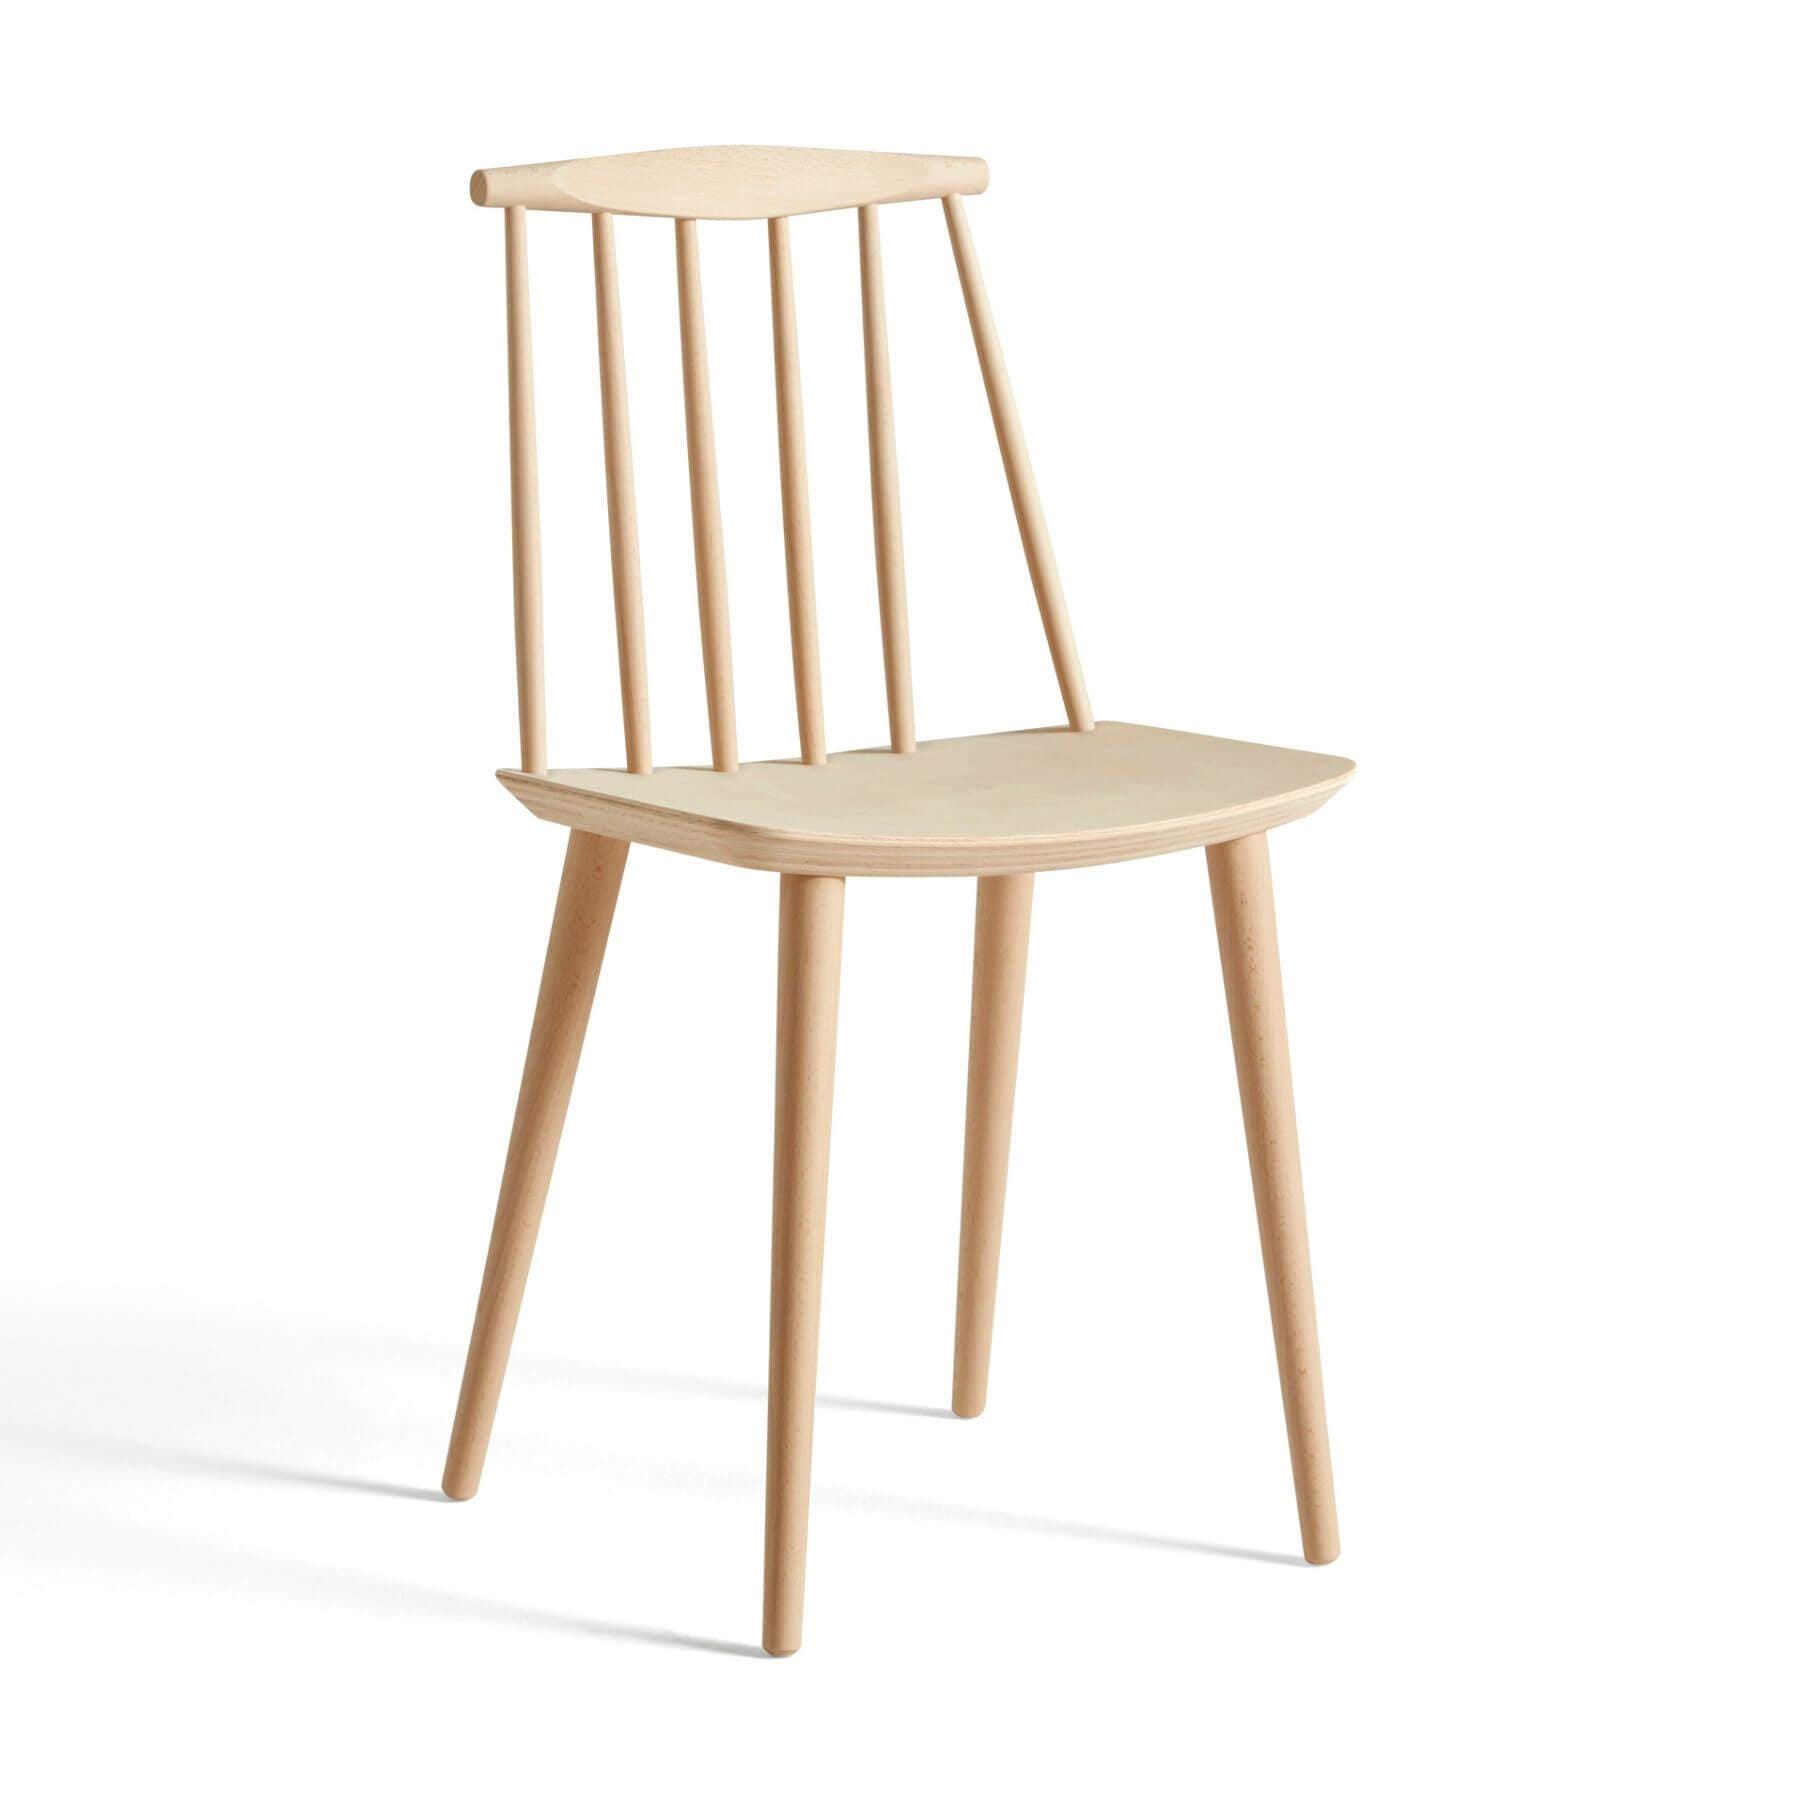 Hay Jseries 77 Dining Chair Nature Solid Beech Standard Gliders Light Wood Designer Furniture From Holloways Of Ludlow